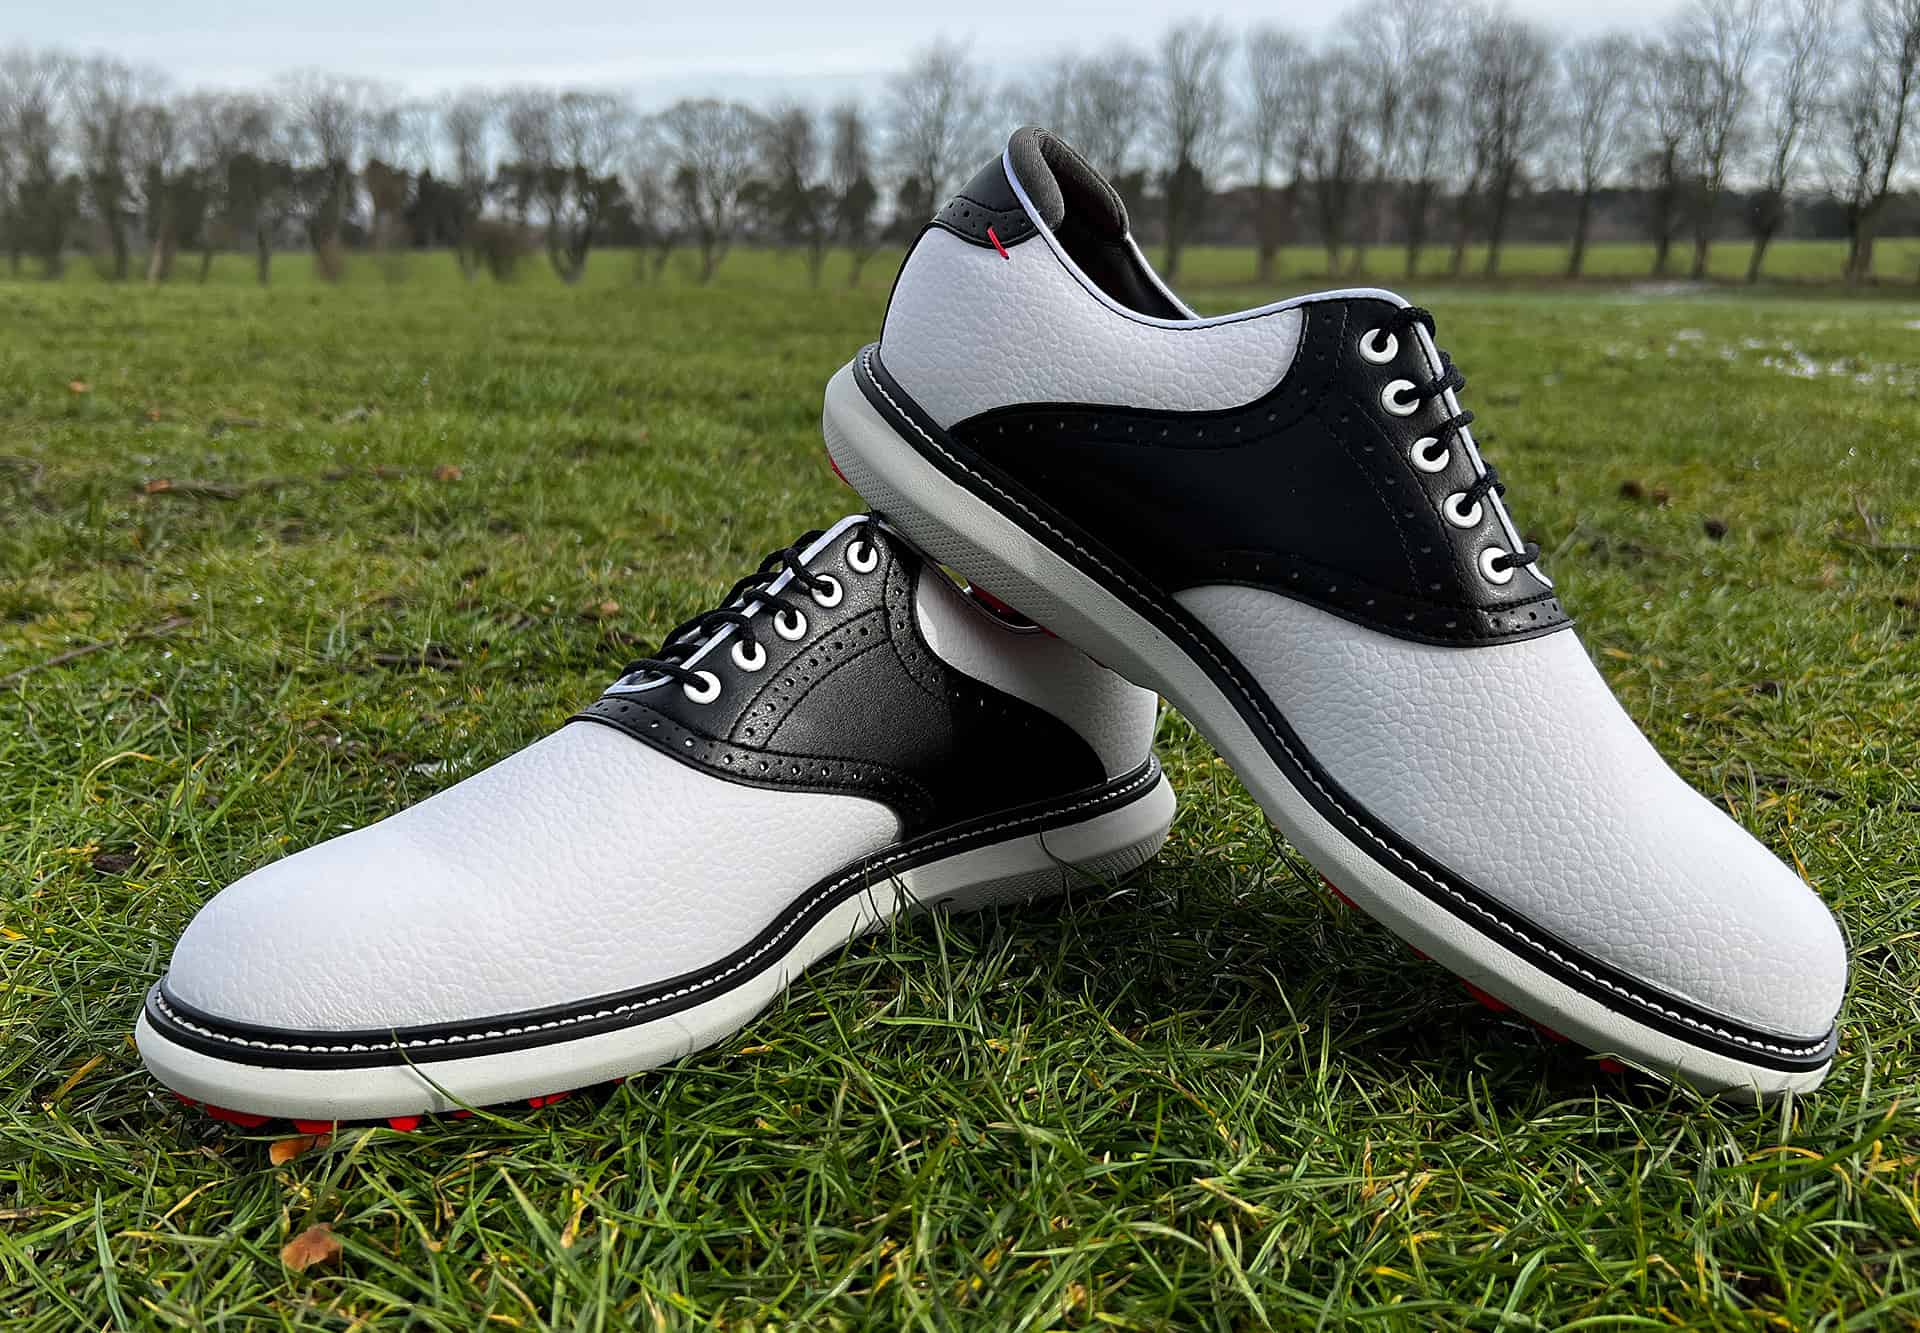 FootJoy Traditions Golf Shoes Review